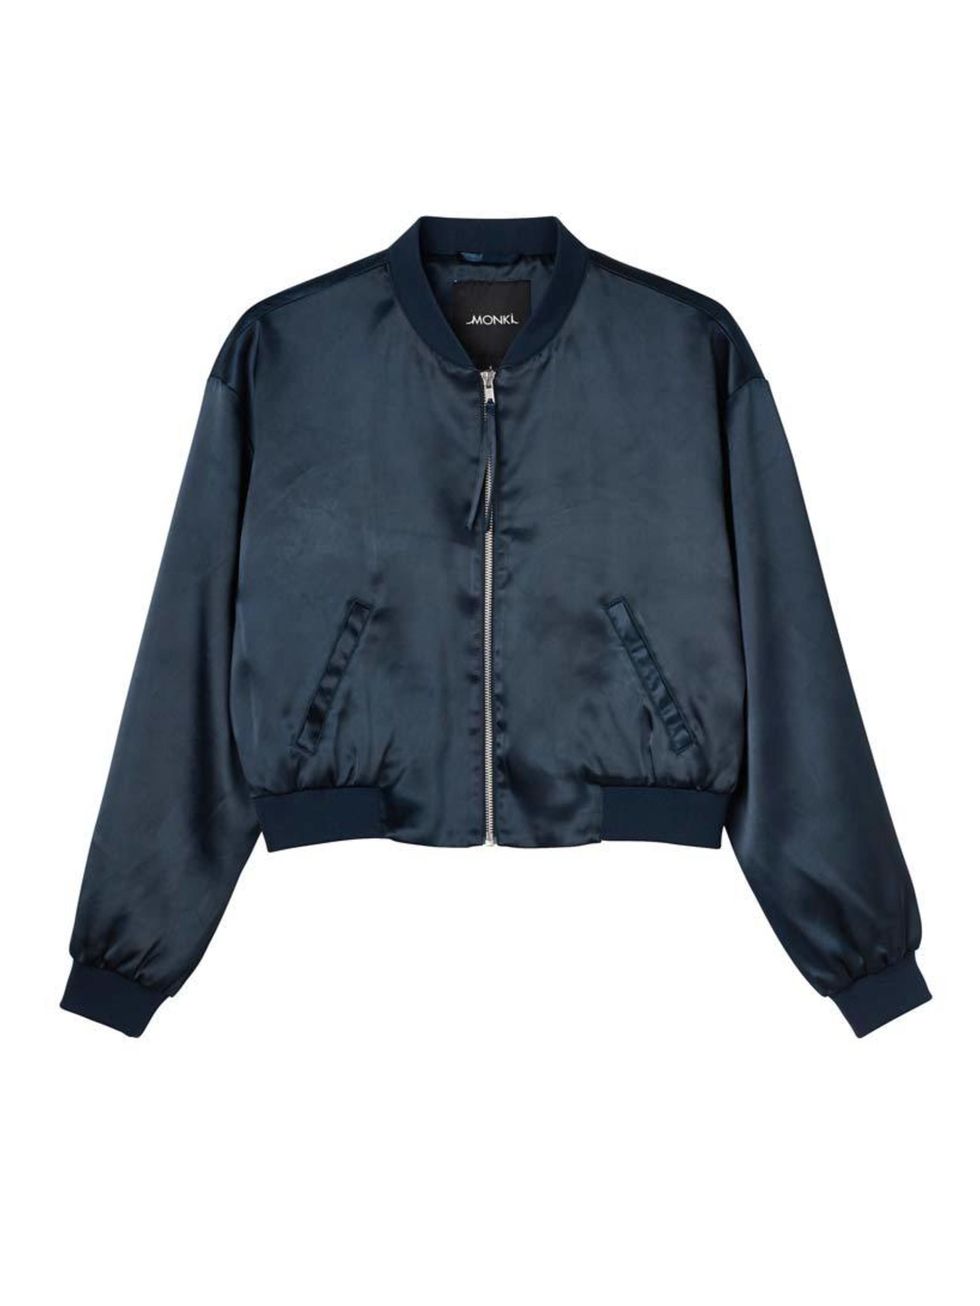 <p>Breaking news: Accessories Editor Donna Wallace wears clothes too.</p>

<p><a href="http://www.monki.com/View_all_new/Nicole_satin_bomber/8668818-7888071.1#c-47958" target="_blank">Monki</a> jacket, £30</p>